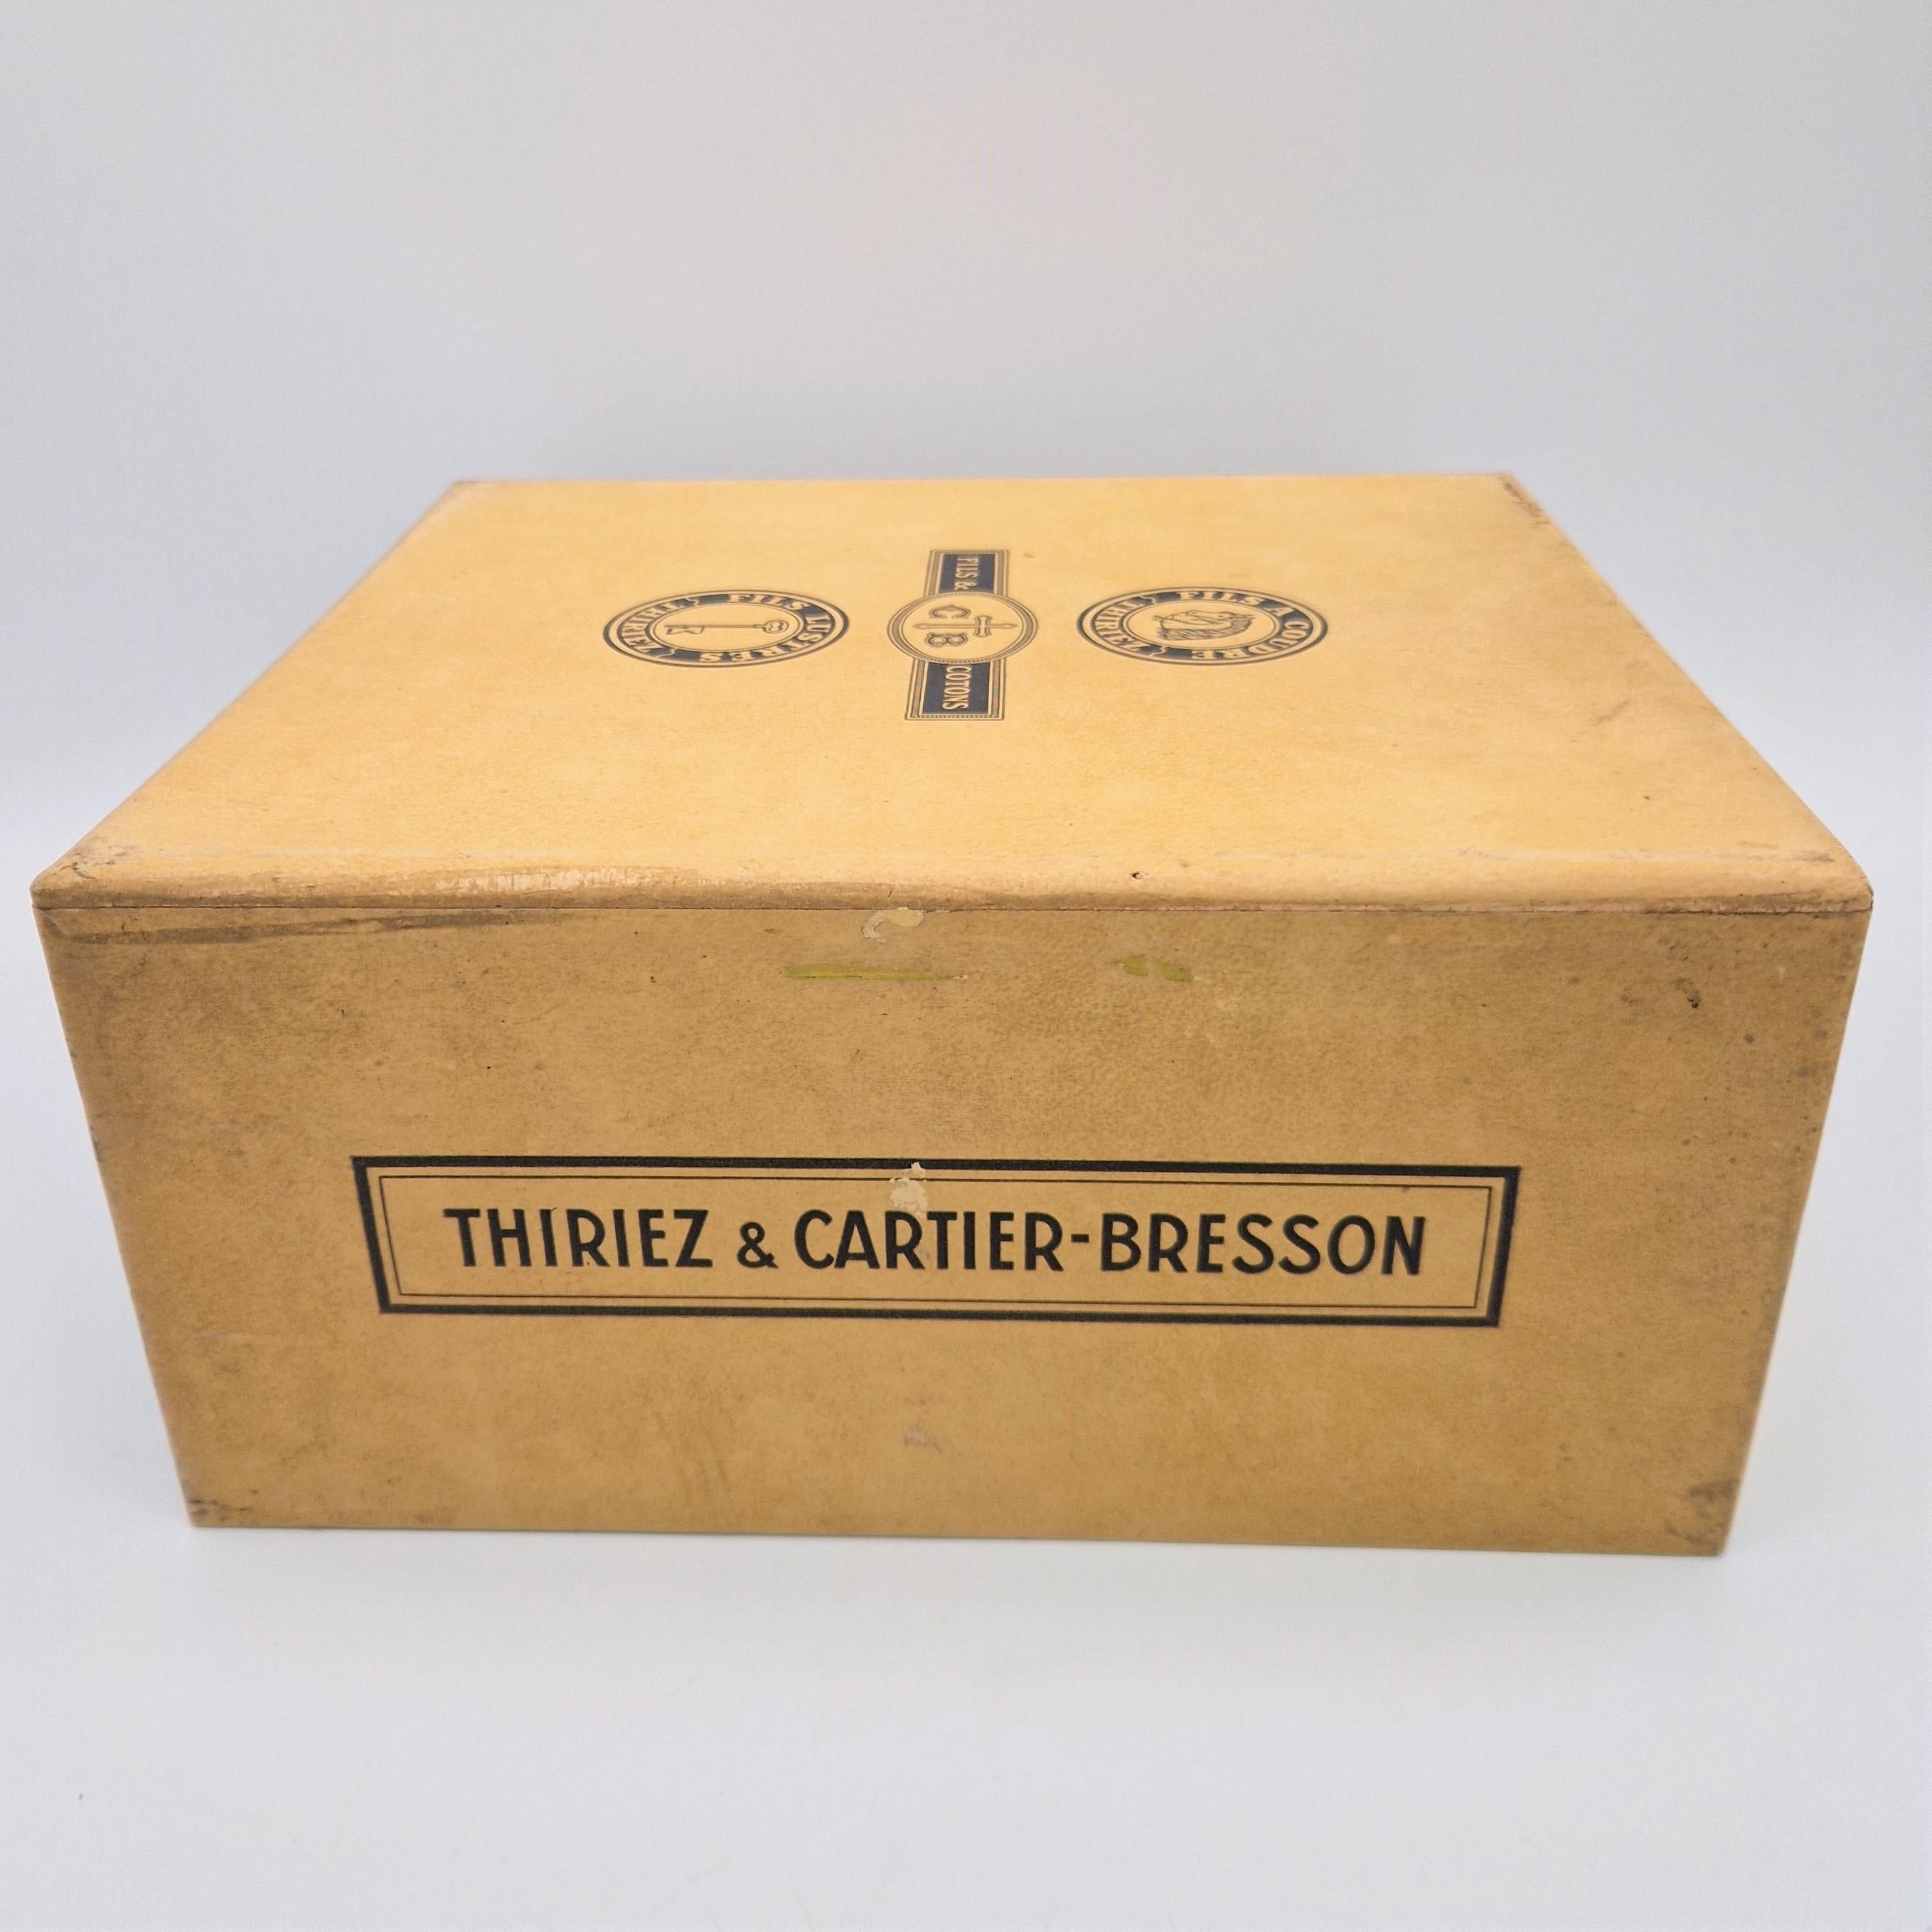 Haberdashery chest of drawers by Thiriez & Cartier Bresson. 1910 - 1920 For Sale 6